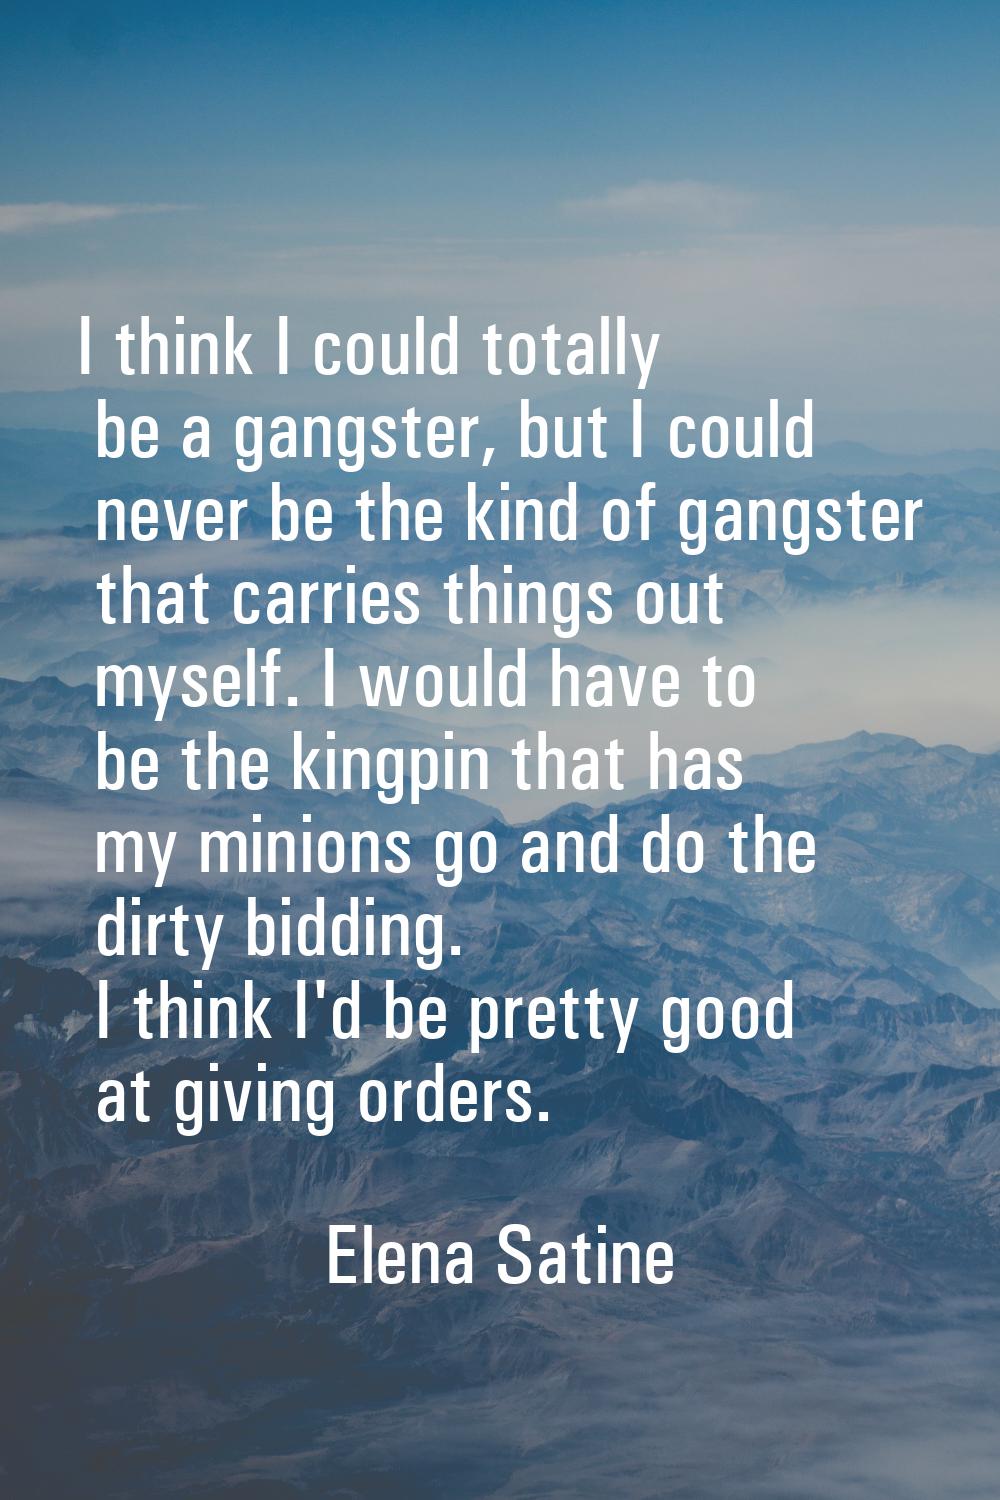 I think I could totally be a gangster, but I could never be the kind of gangster that carries thing